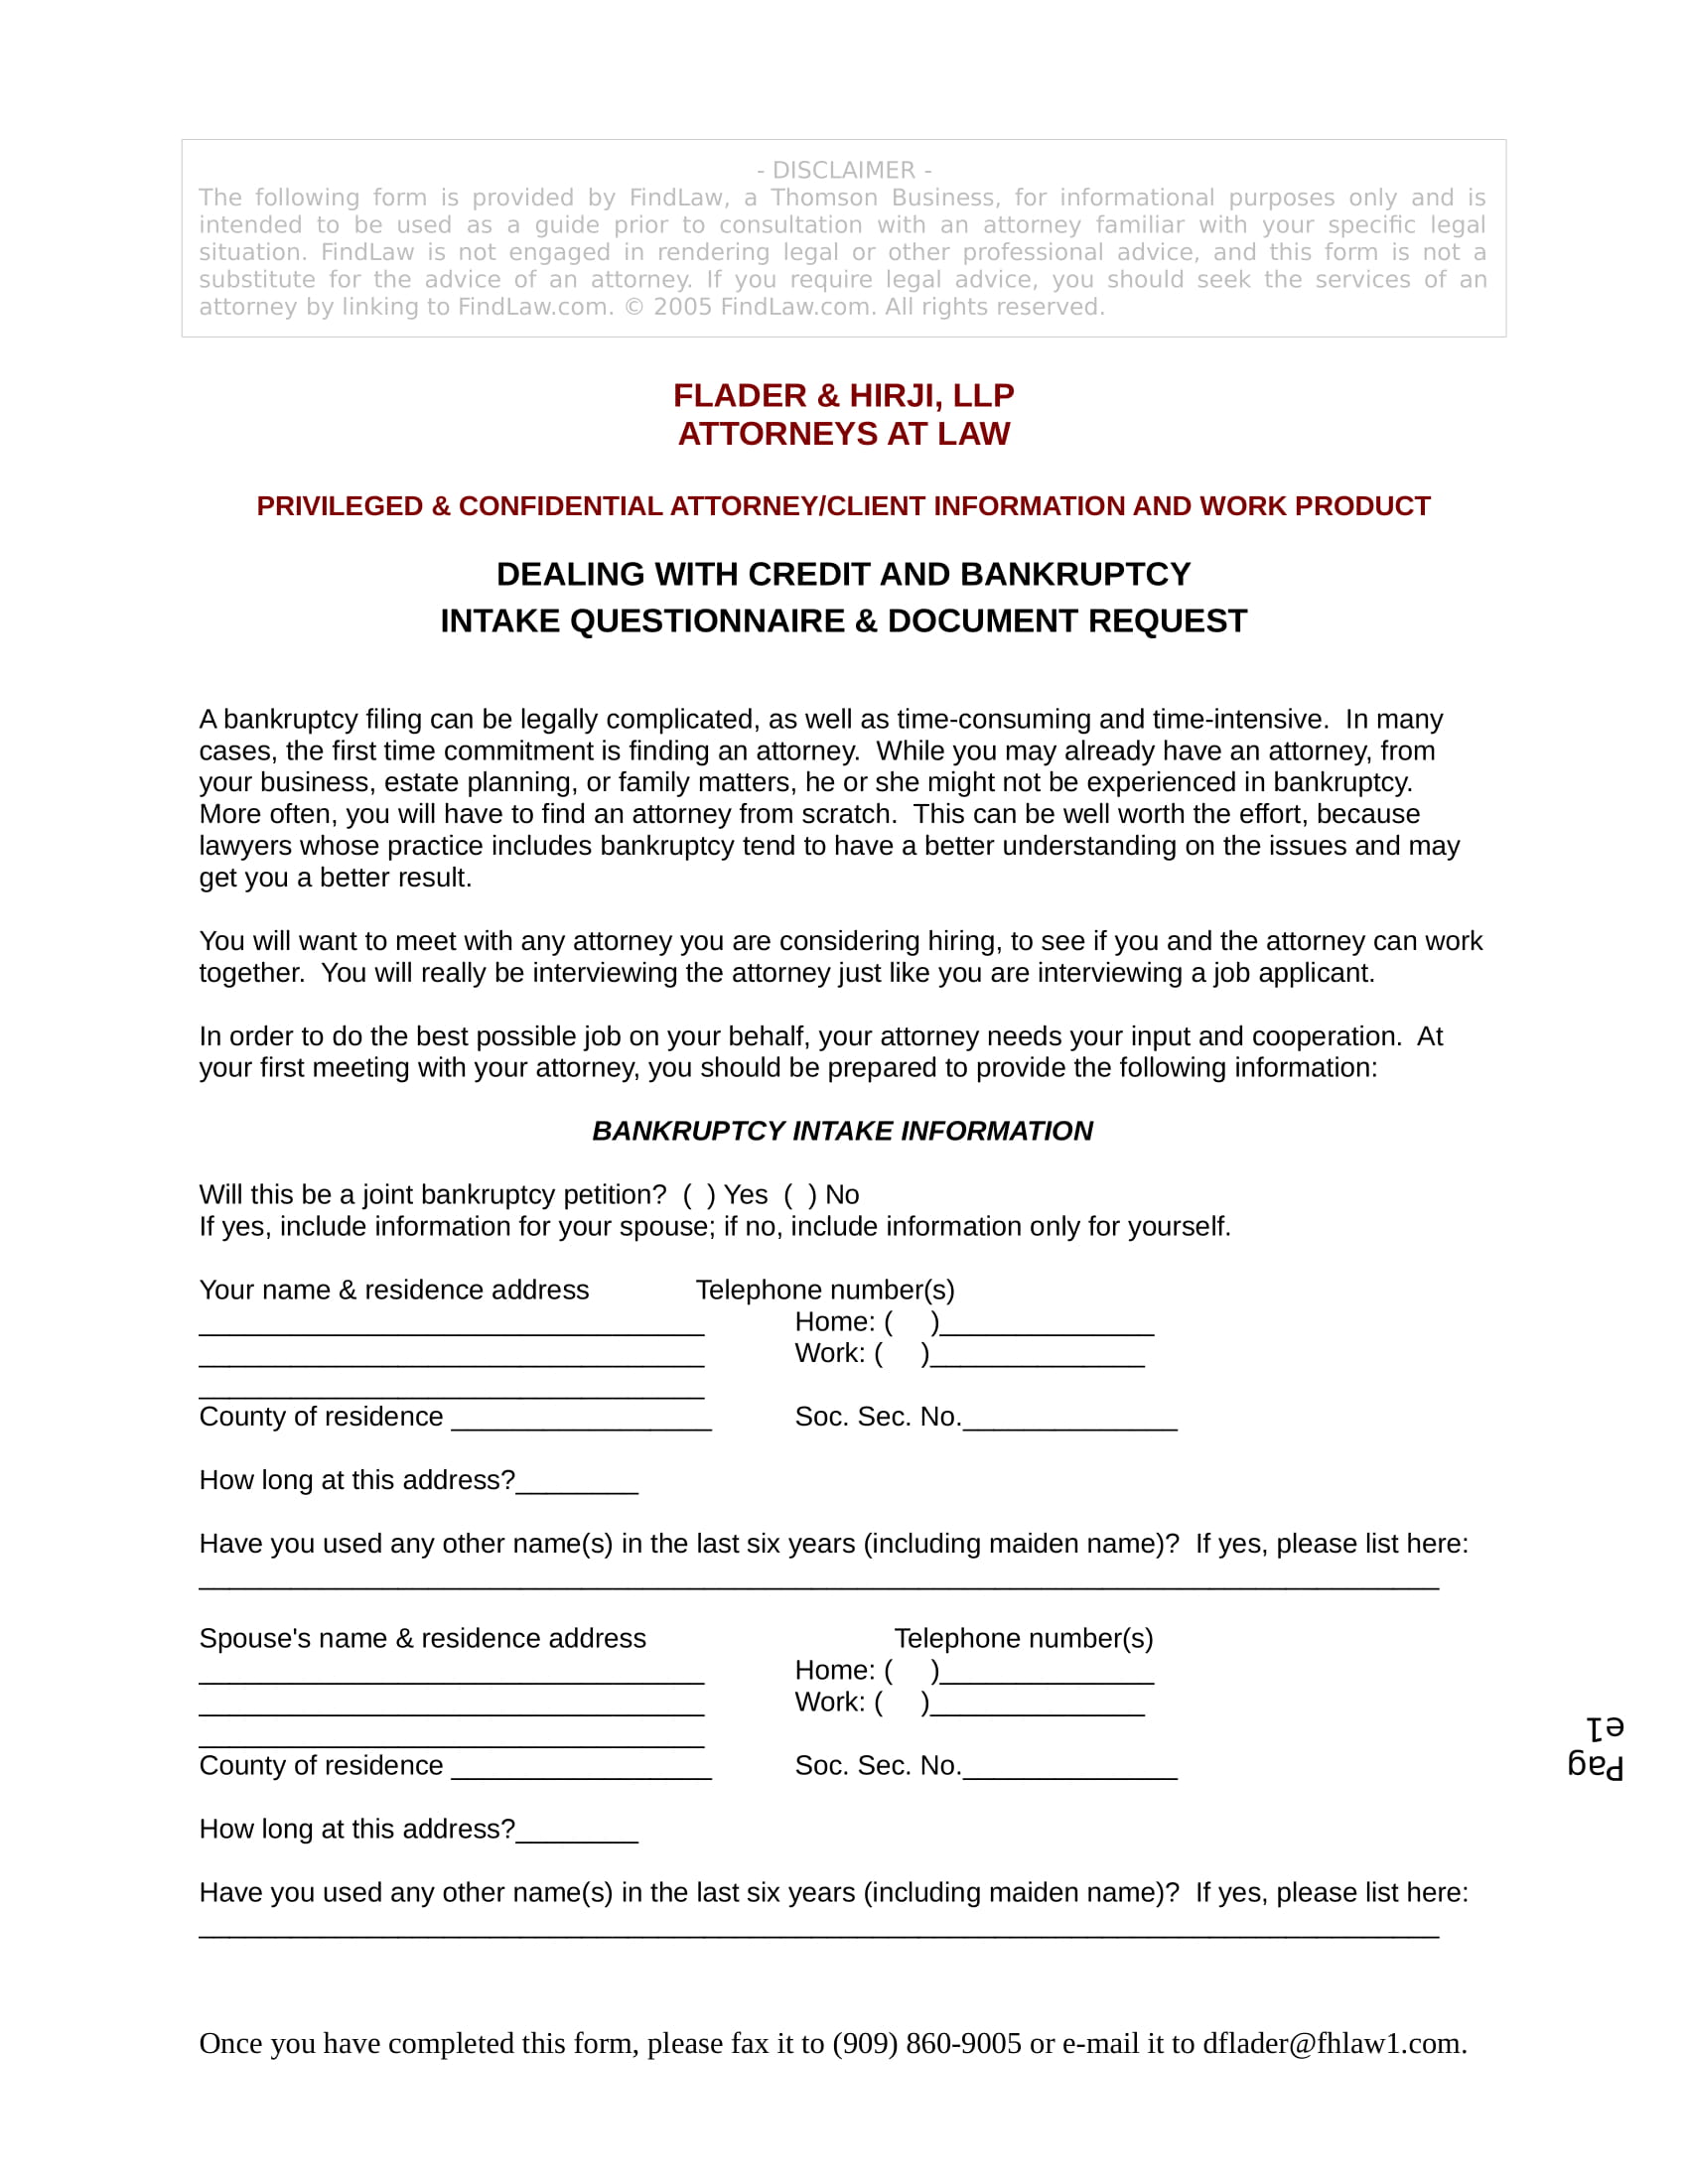 bankruptcy intake form in doc 1